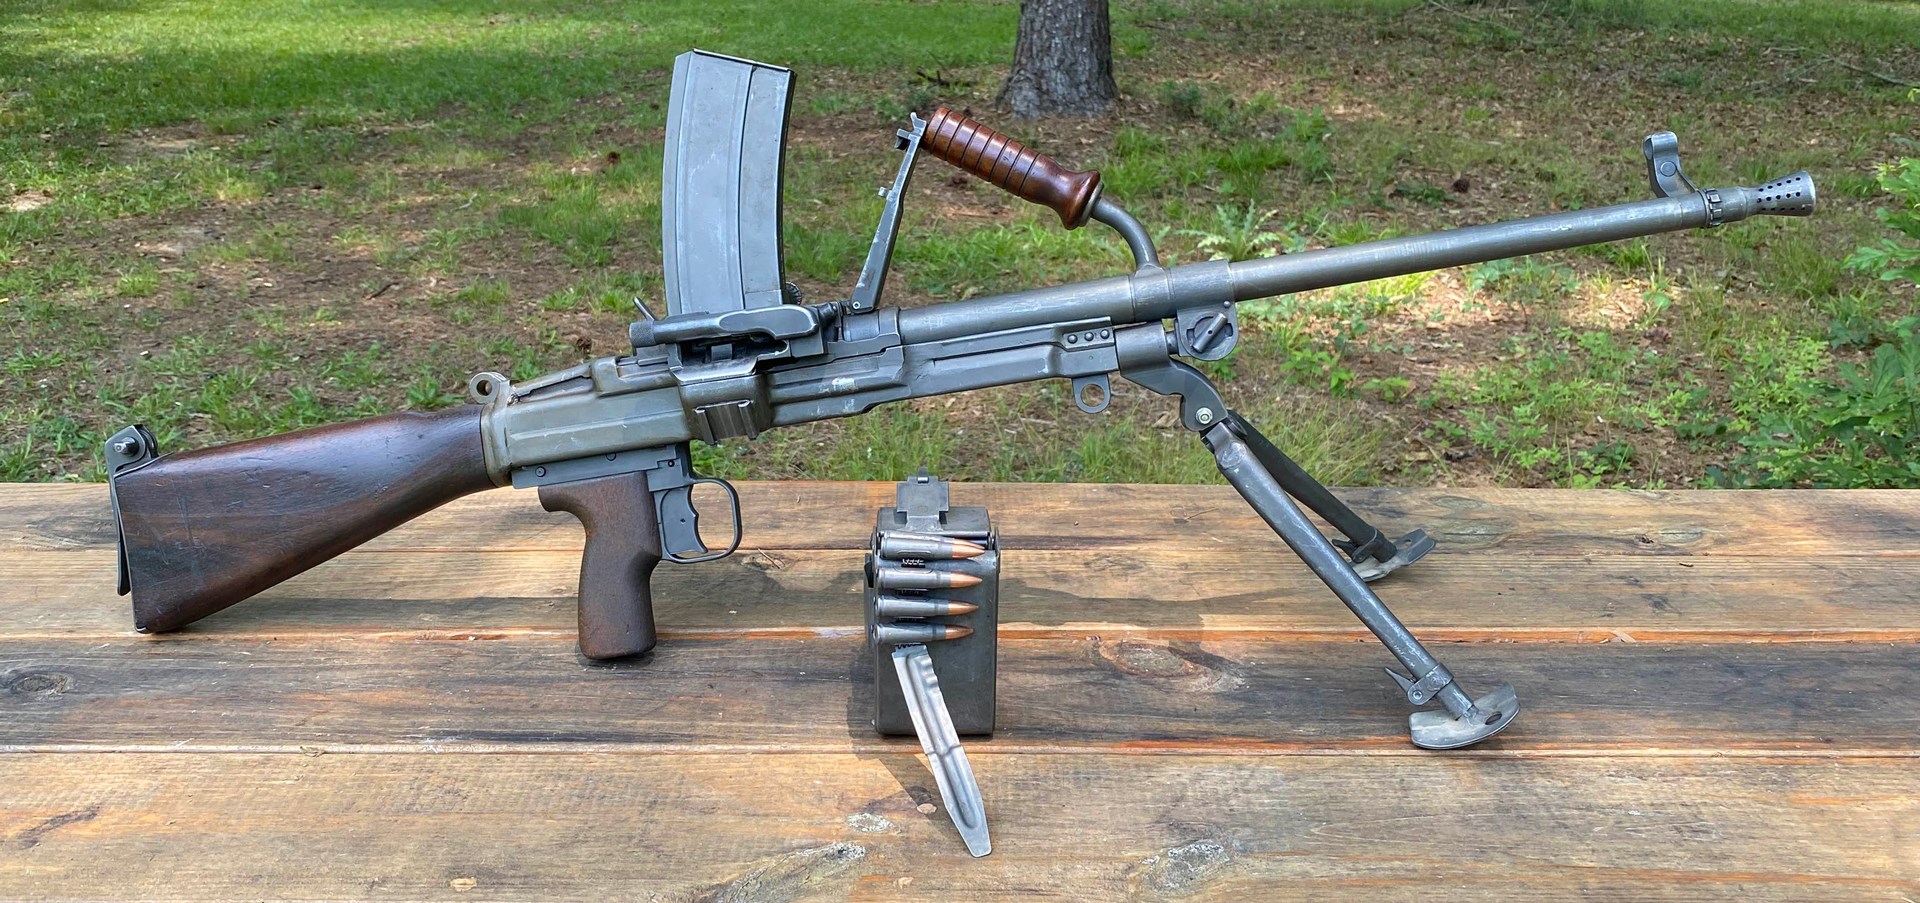 Right-side view of a Post-86 Dealer Sample vz. 52/57 light machine gun in 7.62×39 mm and its ammunition box/belt-keeper. Image courtesy of Martin K.A. Morgan.